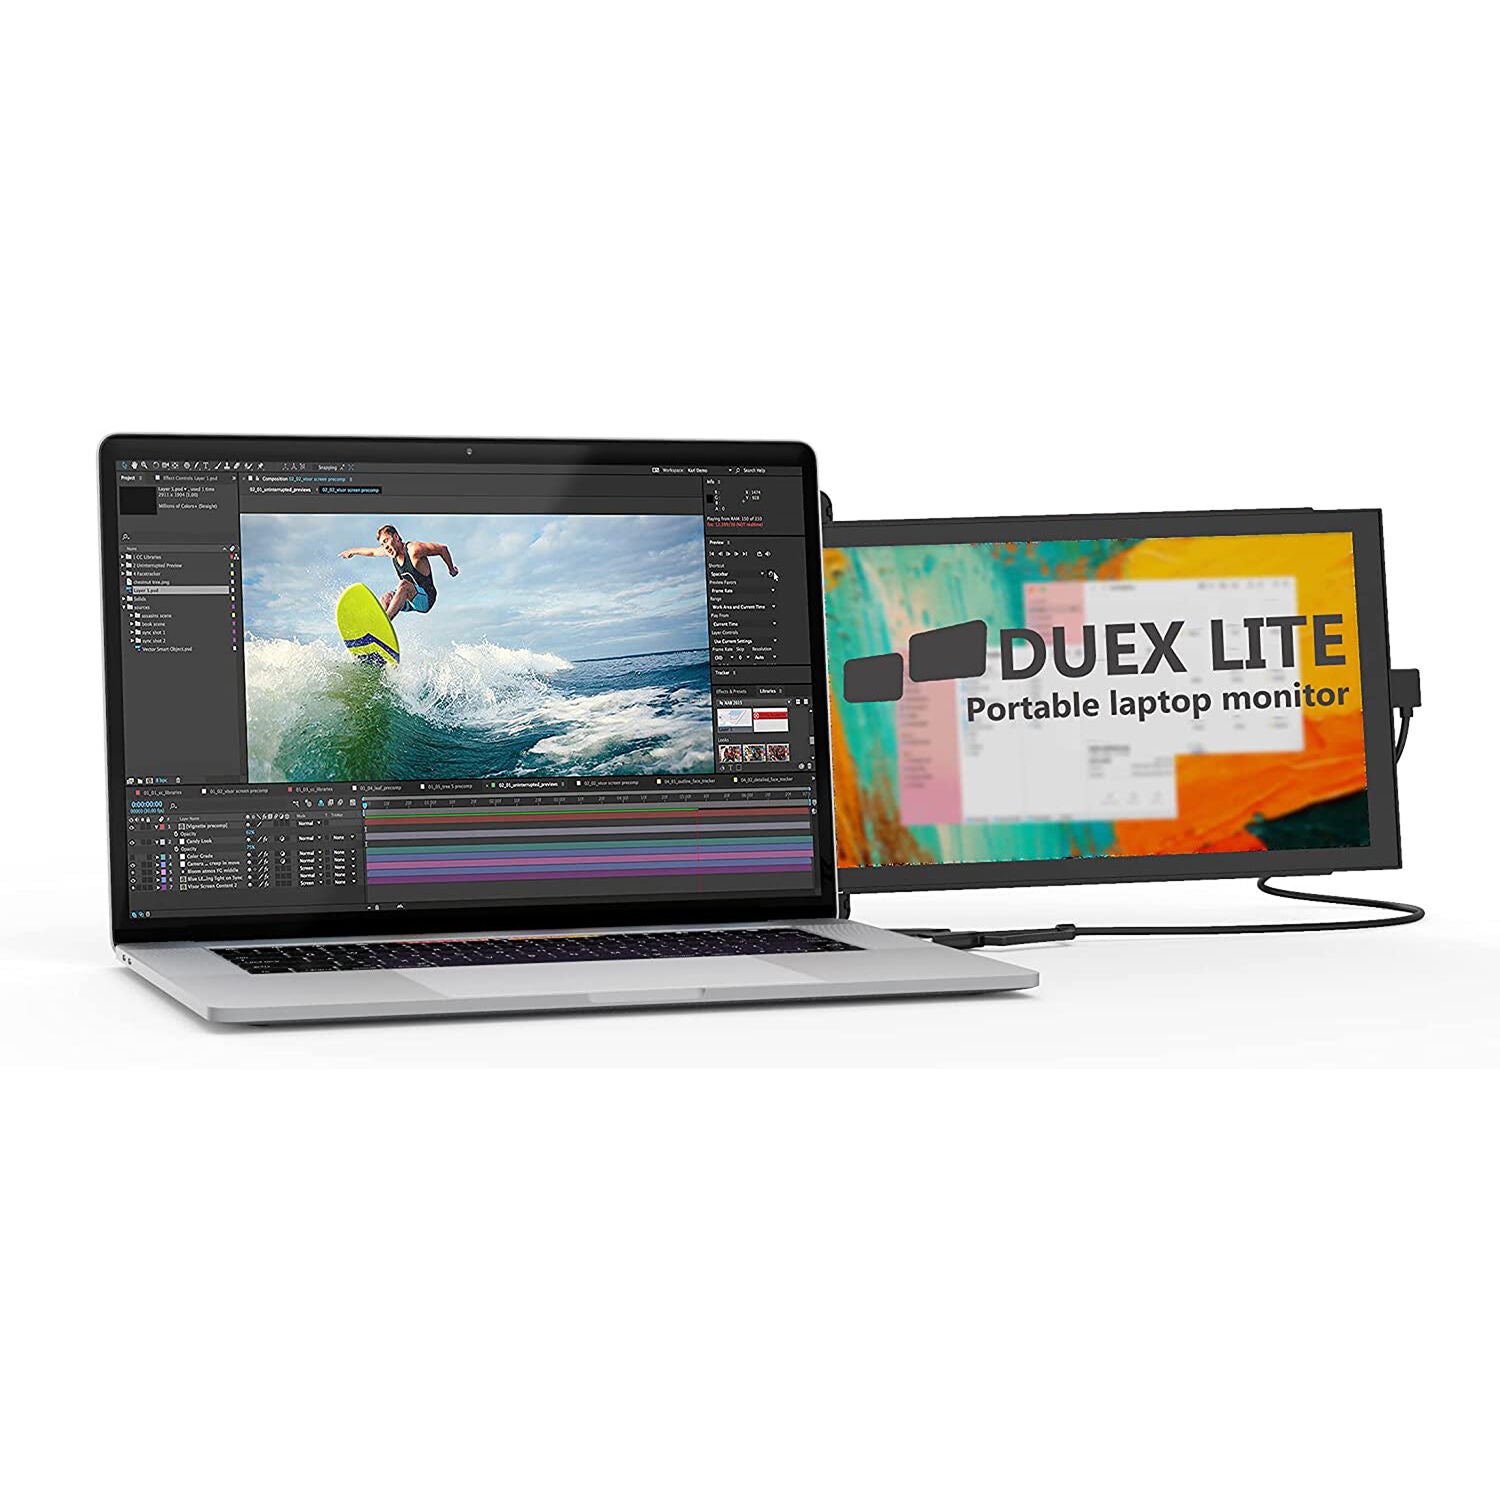 Mobile Pixels MPDUEXLITEGY-RB Duex Lite 12.5" Portable Monitor FHD 1080p Laptop Screen Extender, Gray - Certified Refurbished